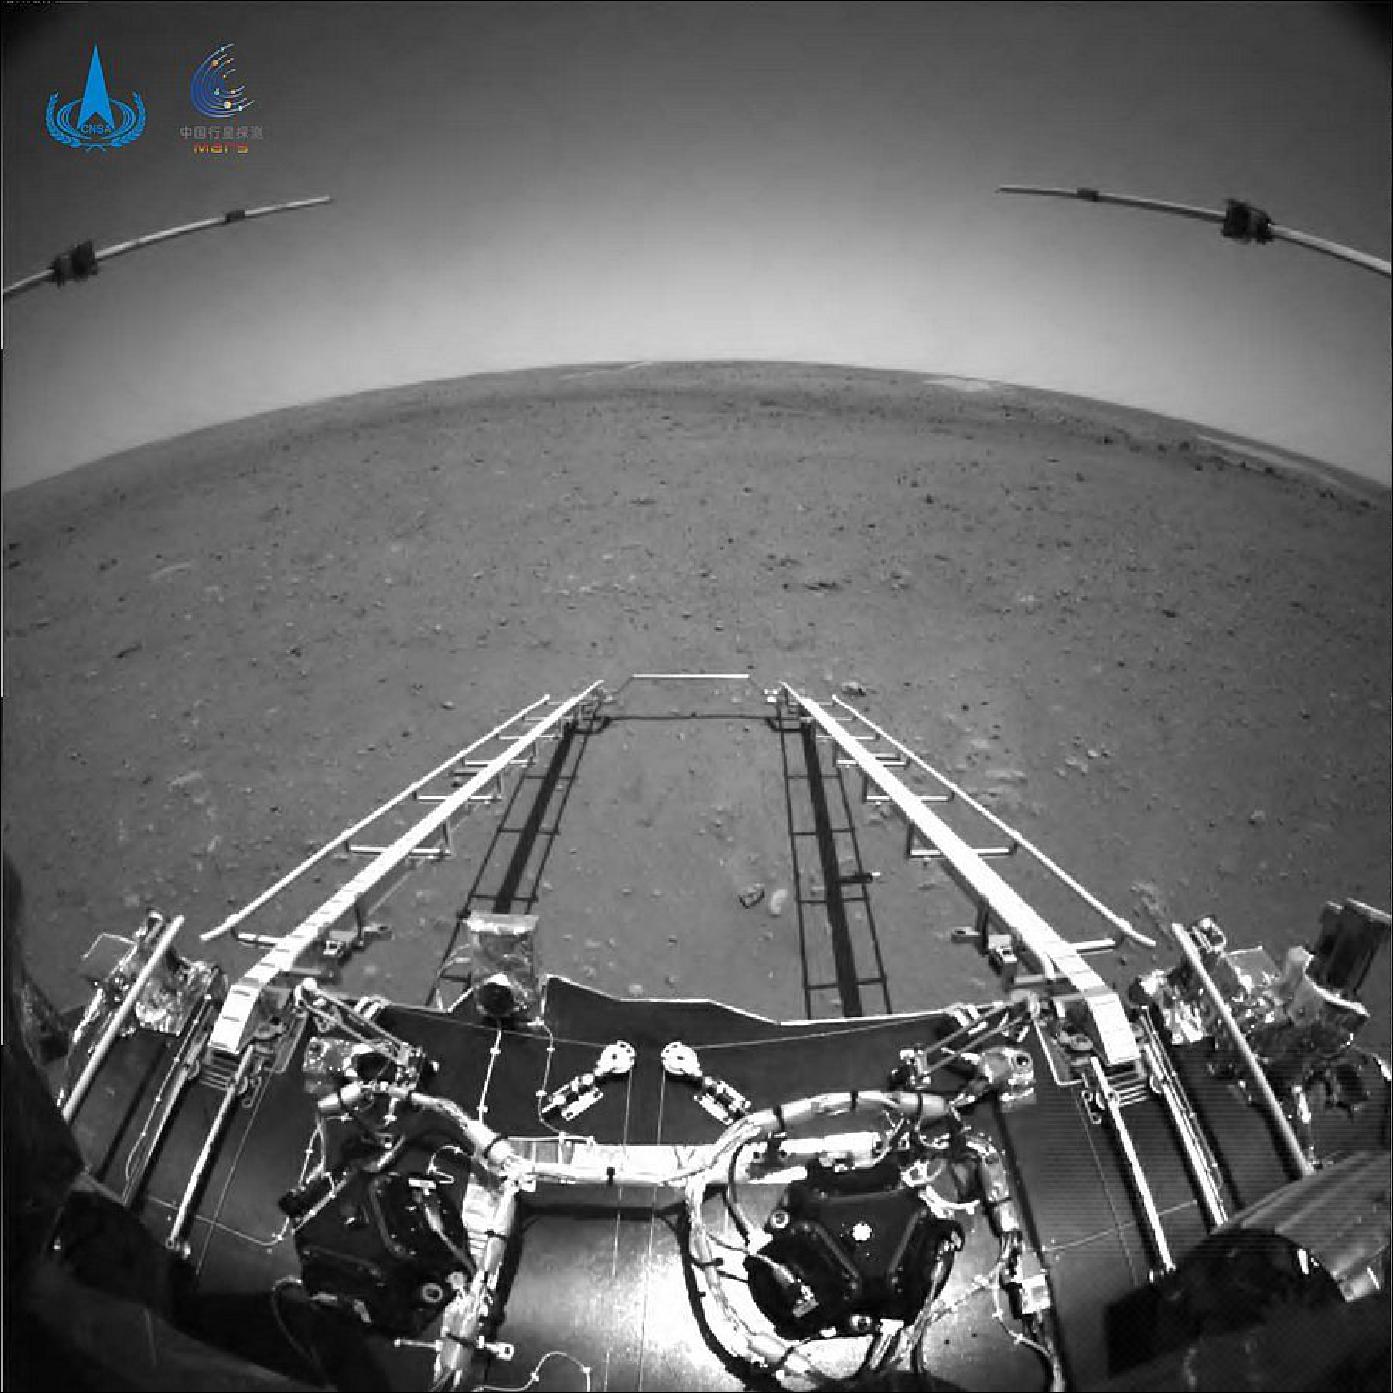 Figure 20: The black and white image taken by an obstacle avoidance camera installed in front of the rover of China's Mars probe Tianwen-1 shows that a ramp on the lander has been extended to the surface of Mars. The terrain of the rover's forward direction is clearly visible in the image, and the horizon of Mars appears curved due to the wide-angle lens (image credit: CNSA)